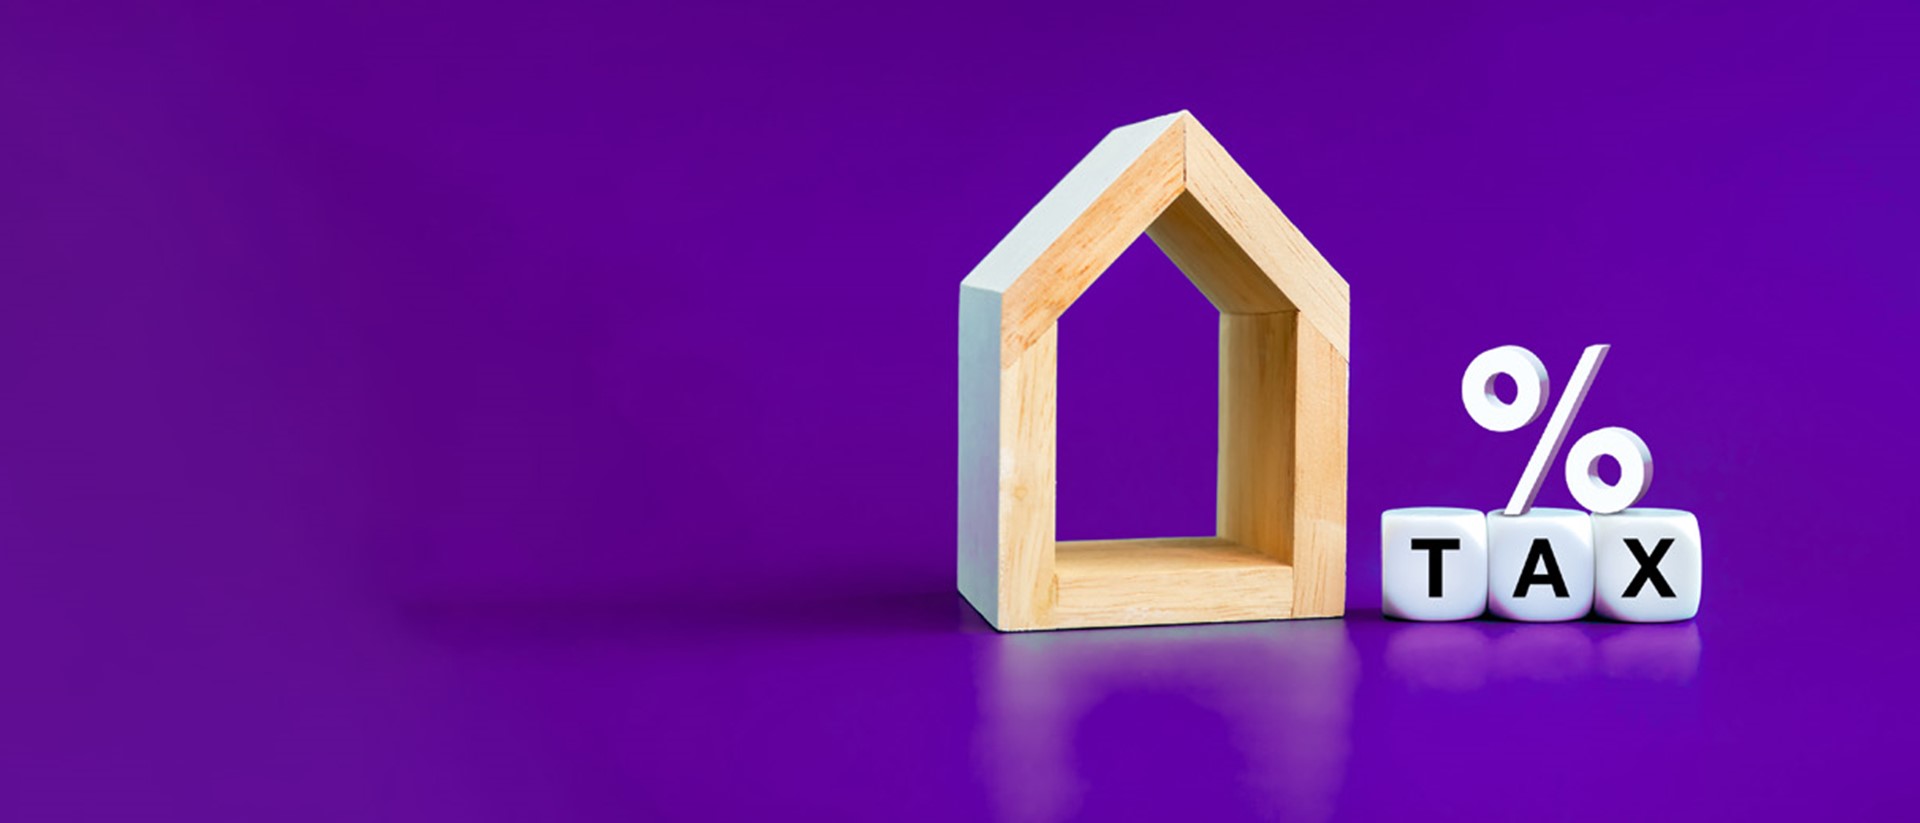 A wooden block shaped as a house, with a percentage symbol on top of dice spelling out TAX, all against a purple background.